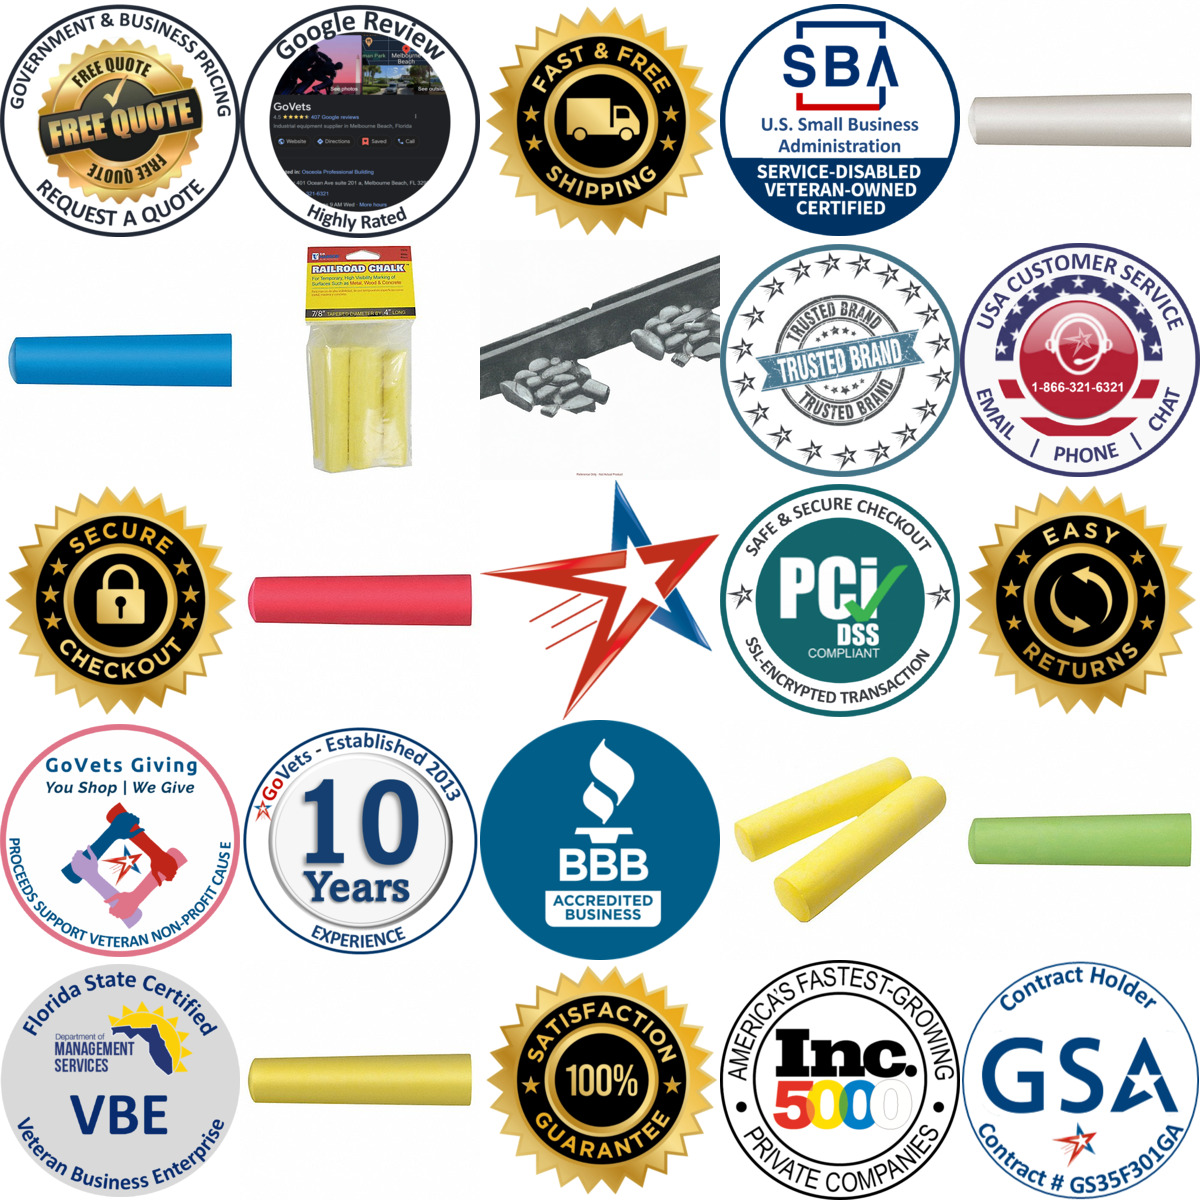 A selection of Railroad Chalks products on GoVets